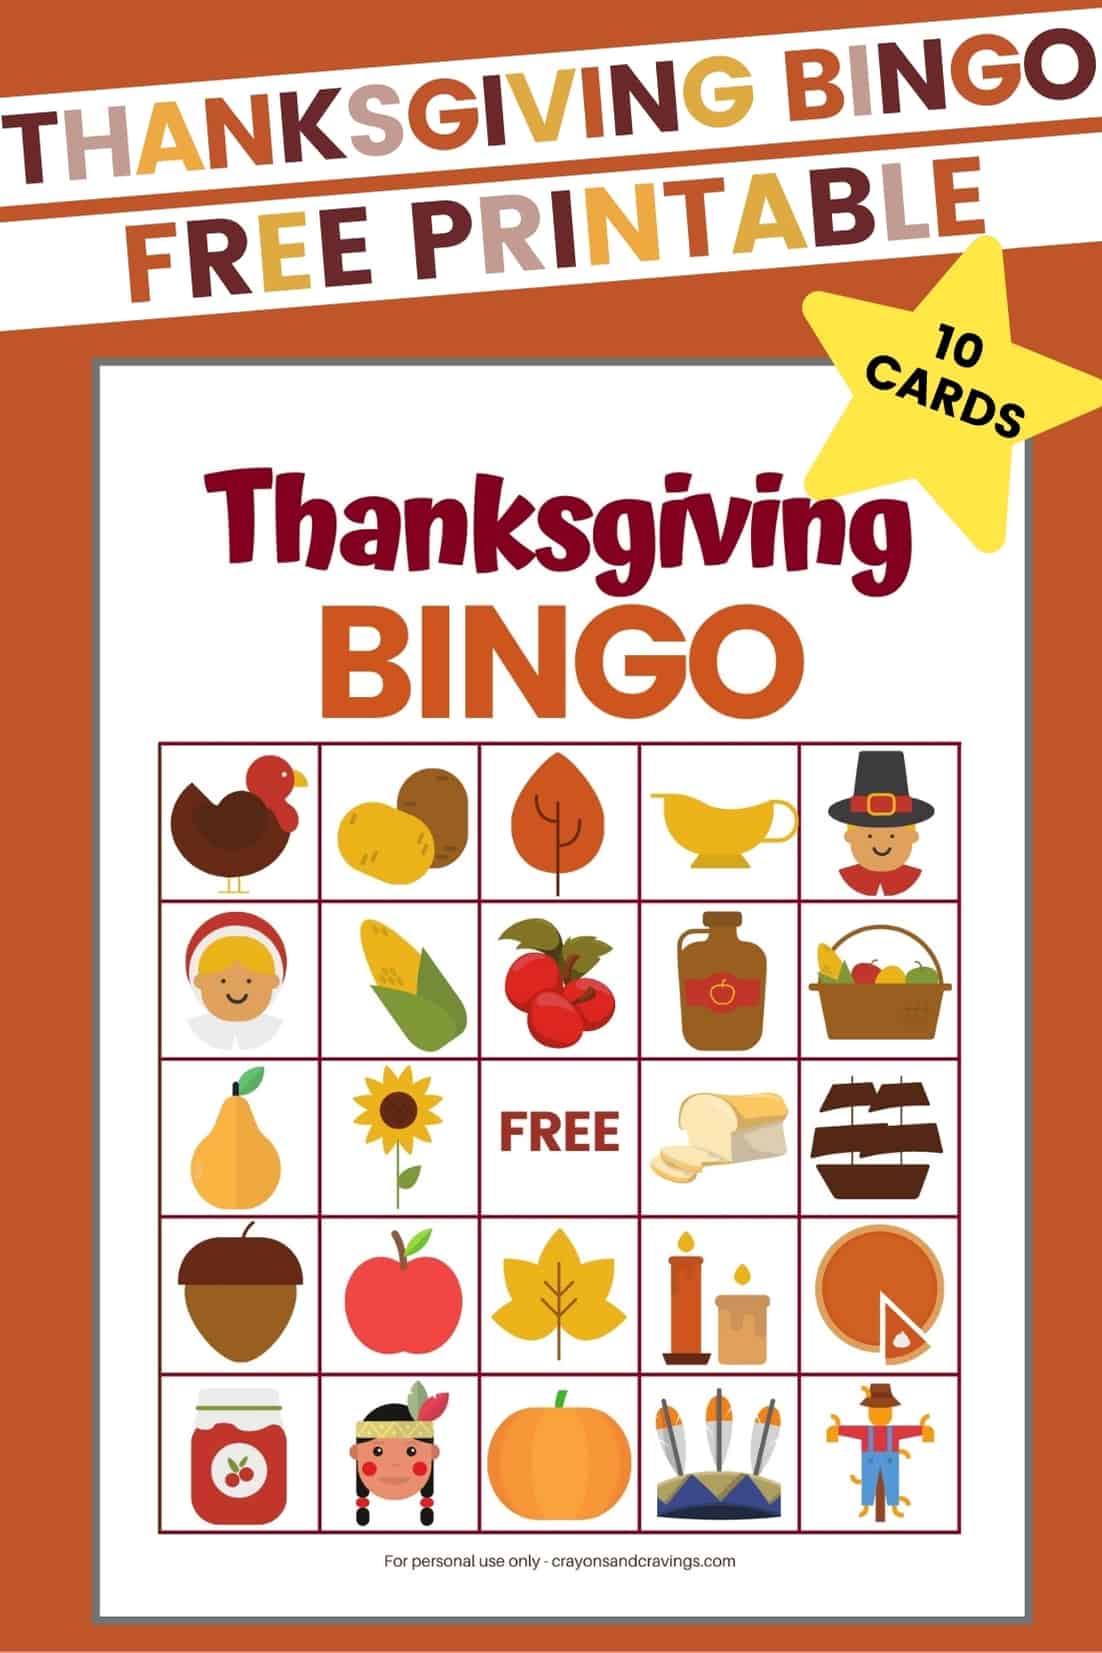 Thanksgiving BINGO Free Printable with 10 different cards.